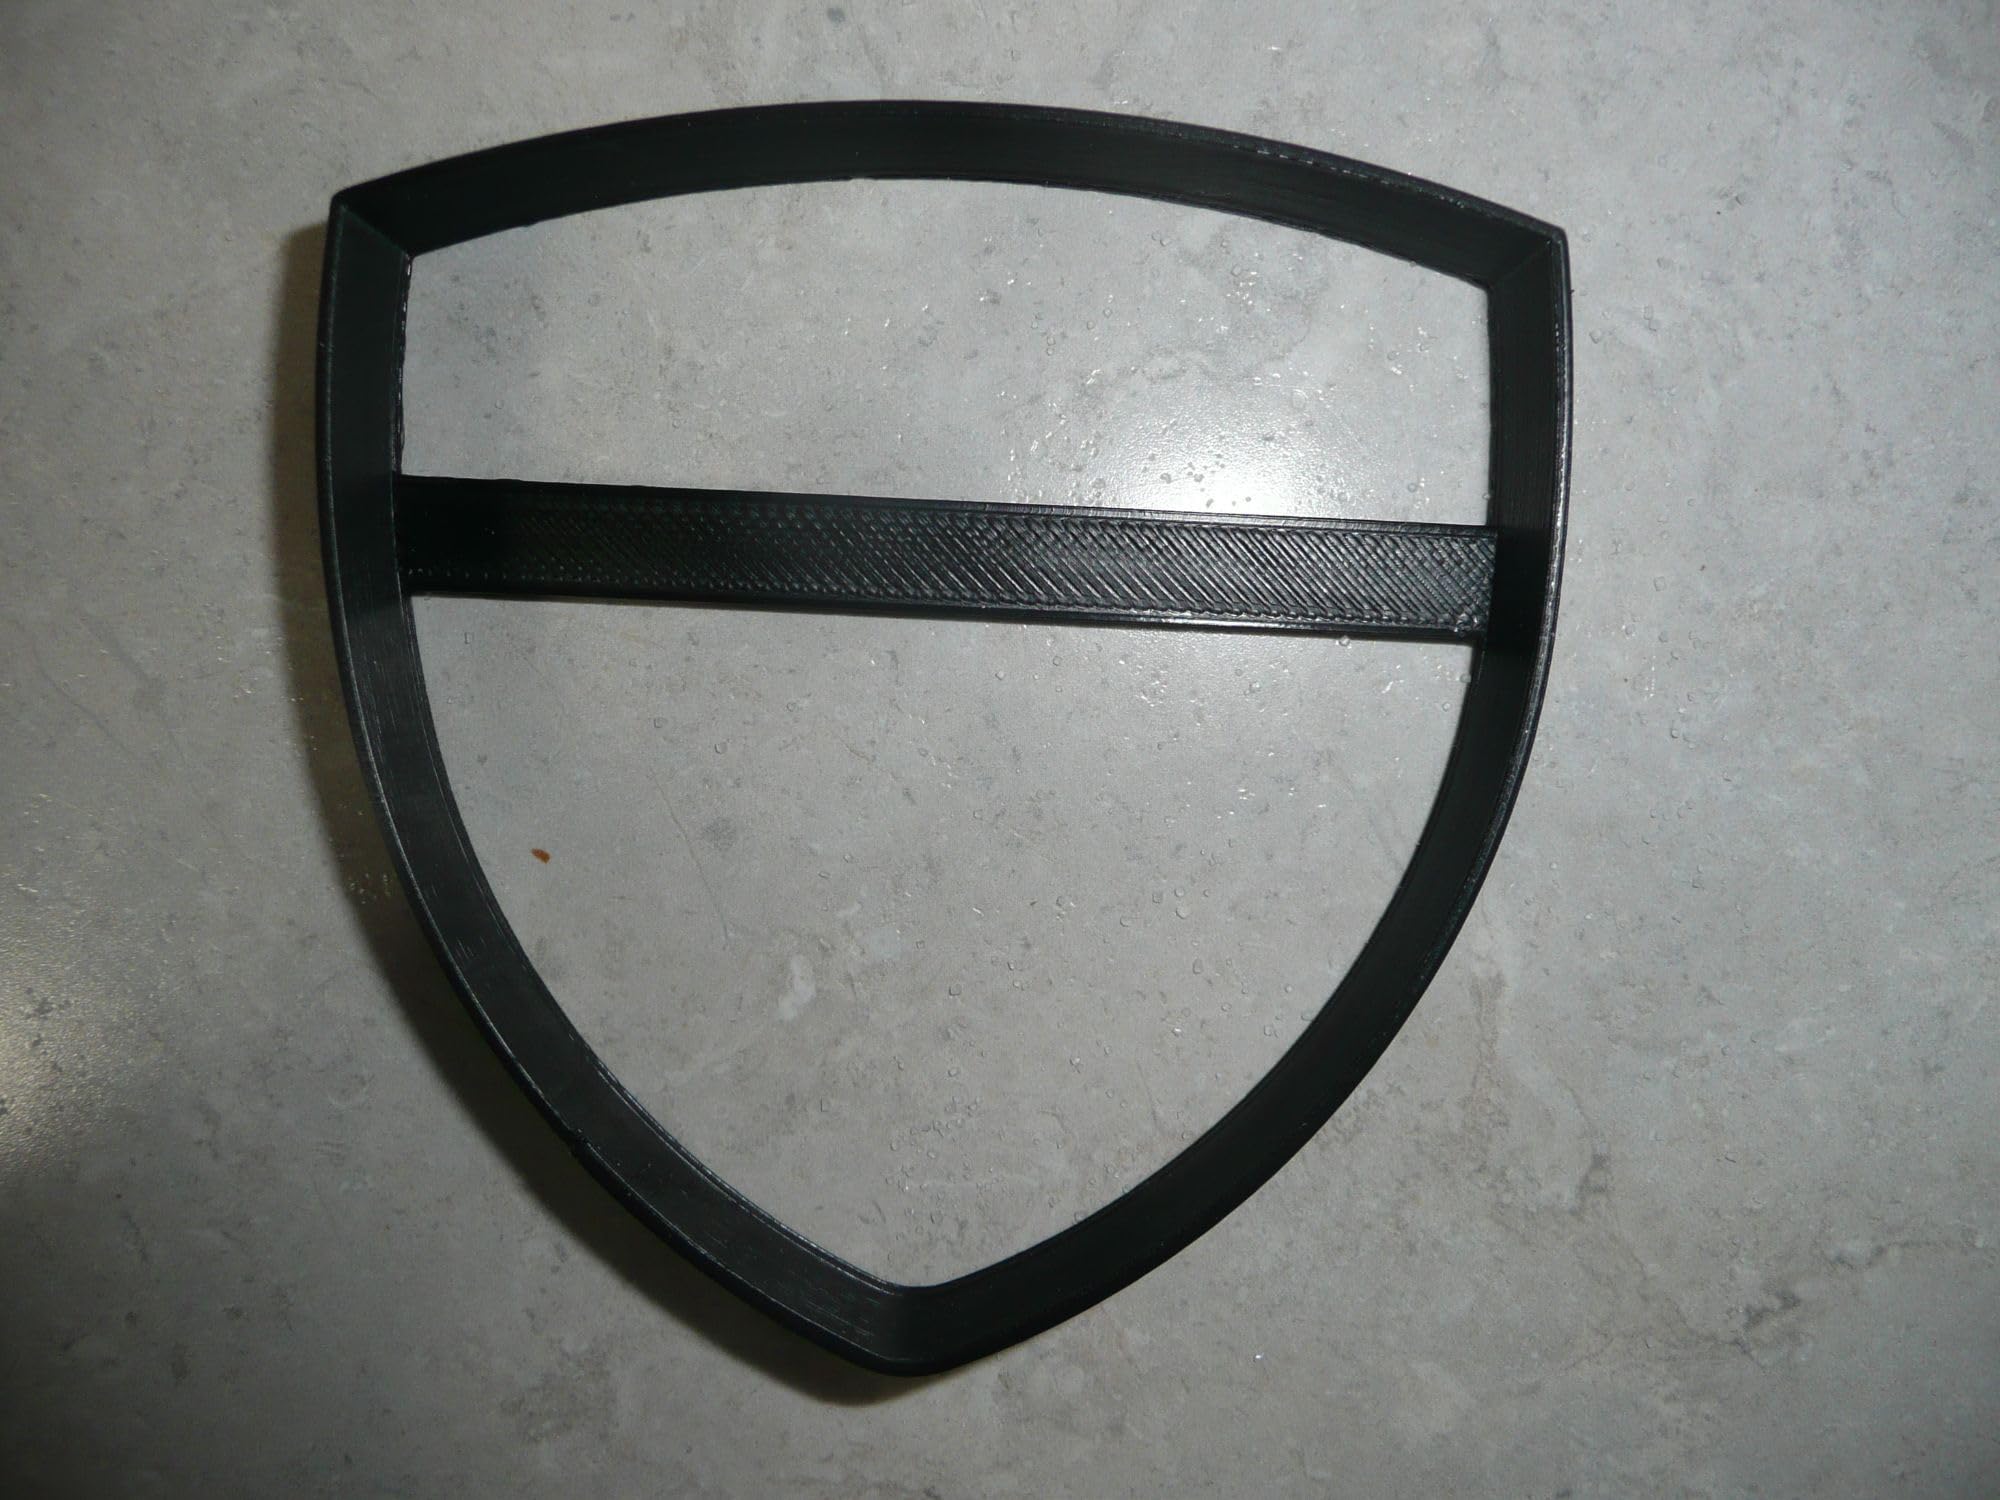 SHIELD KNIGHT GUARD PROTECTION MEDIEVAL TIMES OUTLINE COOKIE CUTTER MADE IN USA PR3175